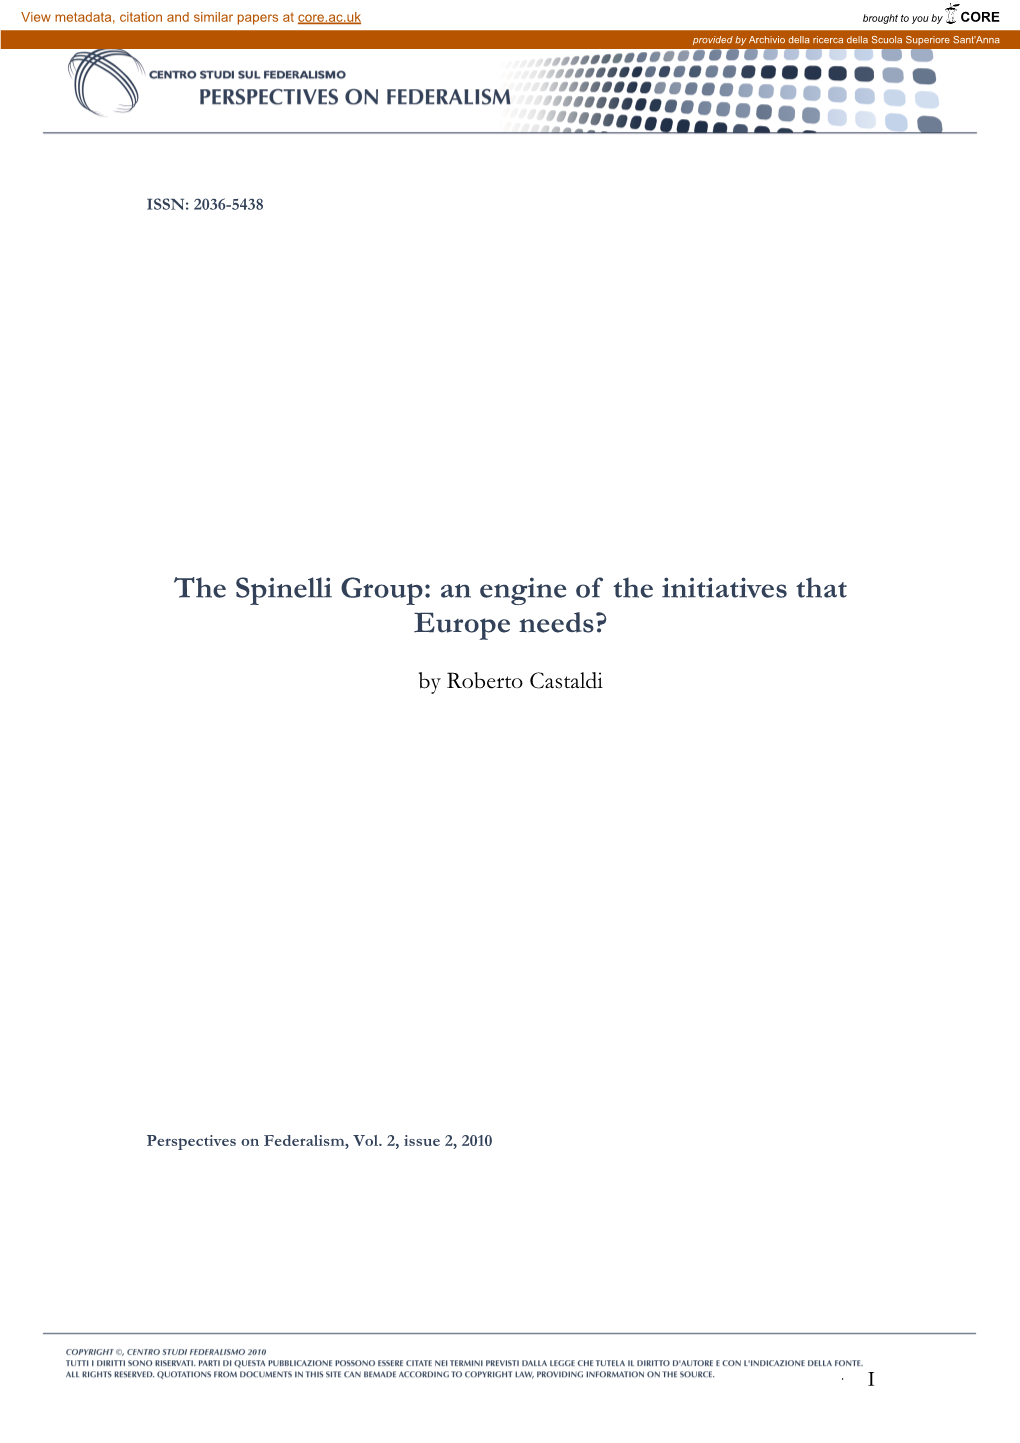 The Spinelli Group: an Engine of the Initiatives That Europe Needs?